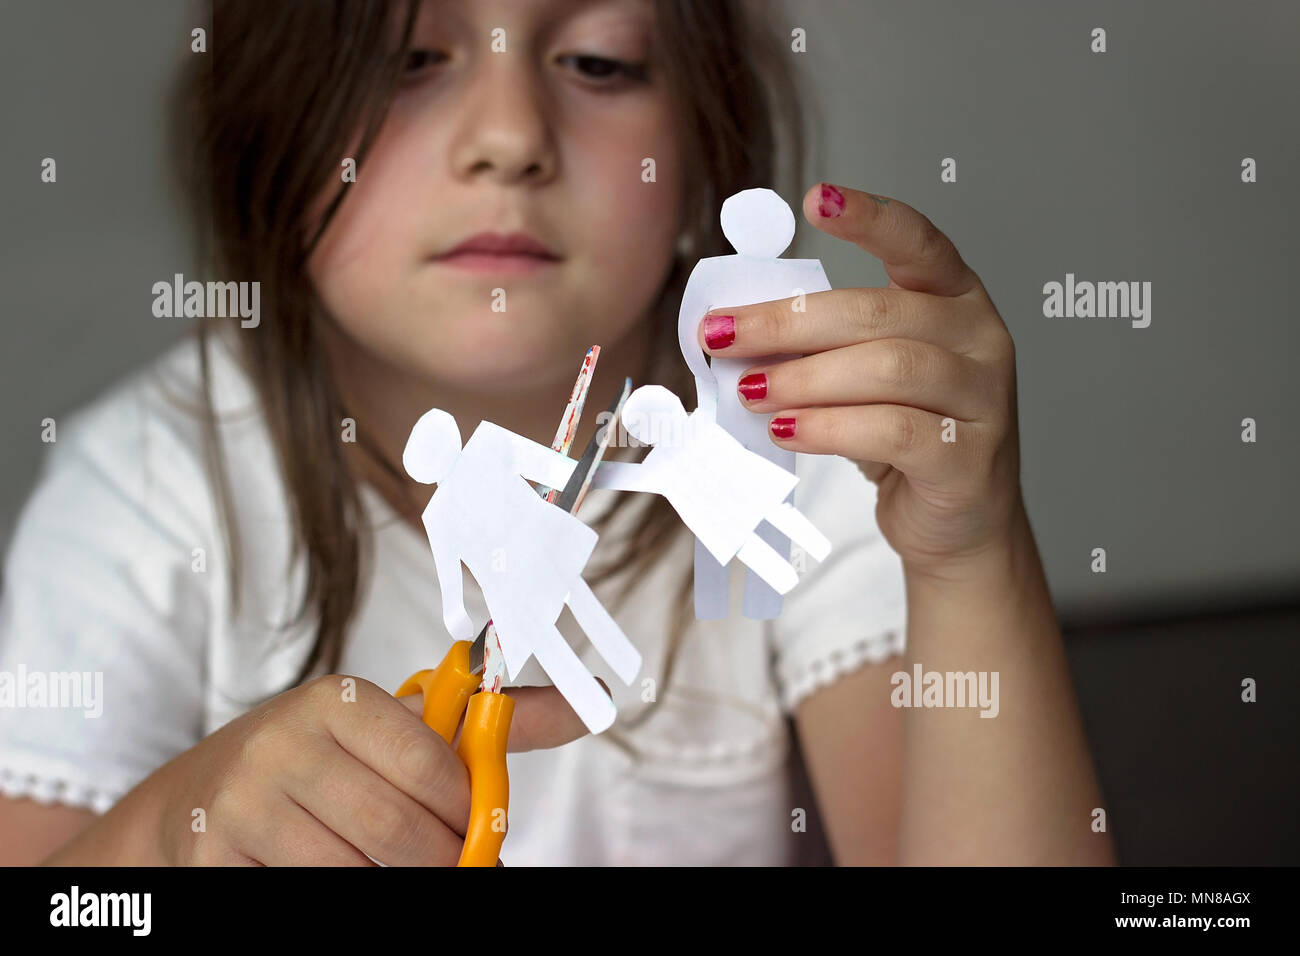 Sad little girl with paper family and scissors; divorce or family problems concept Stock Photo